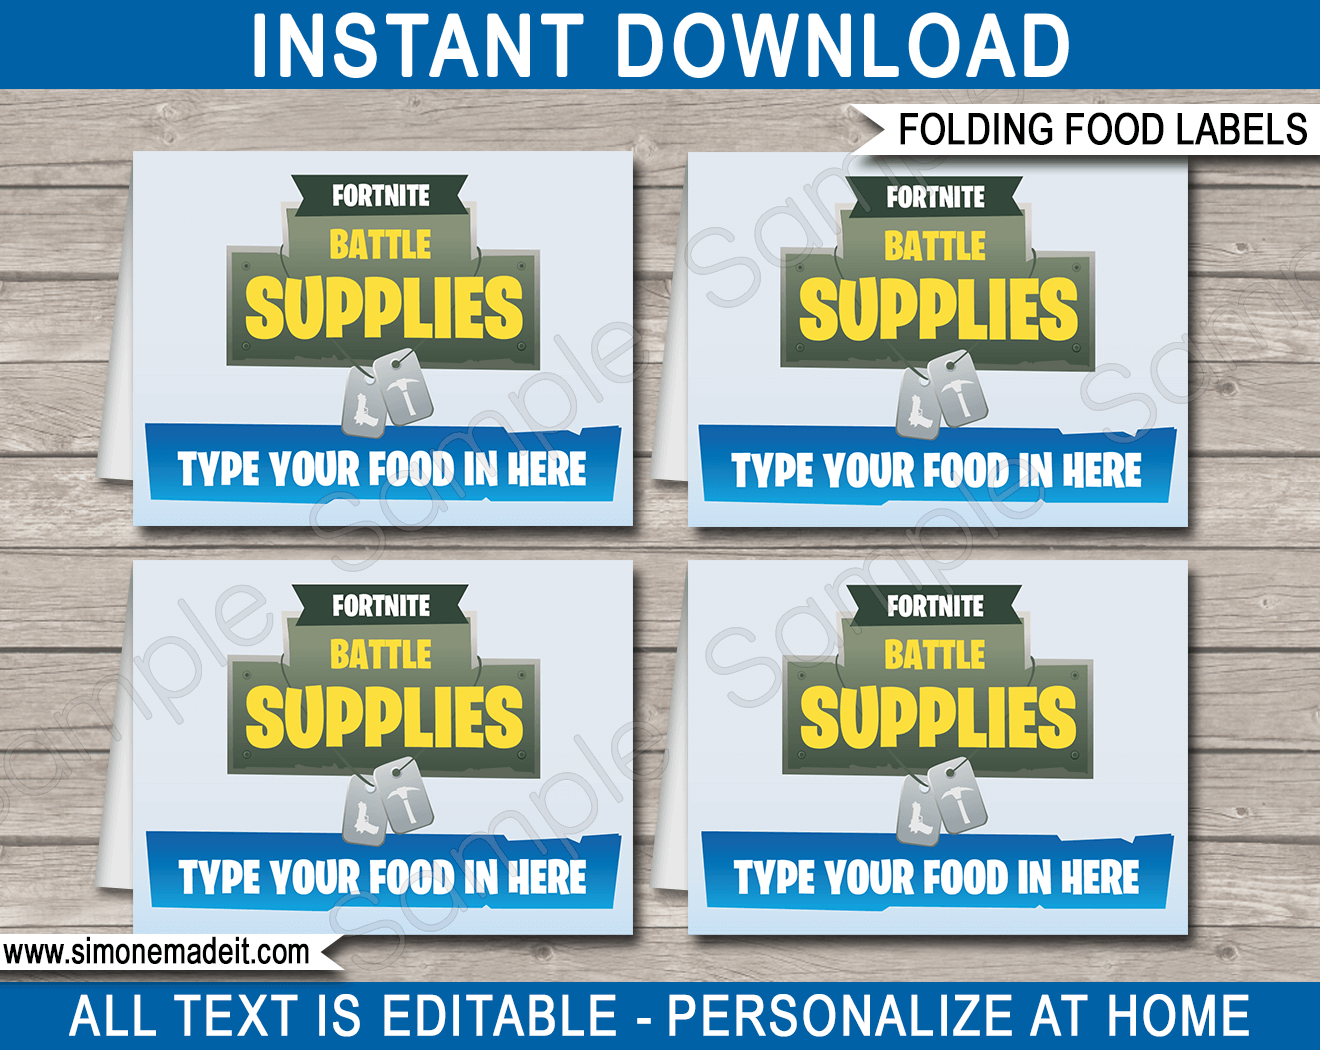 Printable Fortnite Party Food Labels | Food Buffet Tags | Tent Cards | Place Cards | Fortnite Theme Birthday Party Decorations | DIY Editable Template | Instant Download via simonemadeit.com